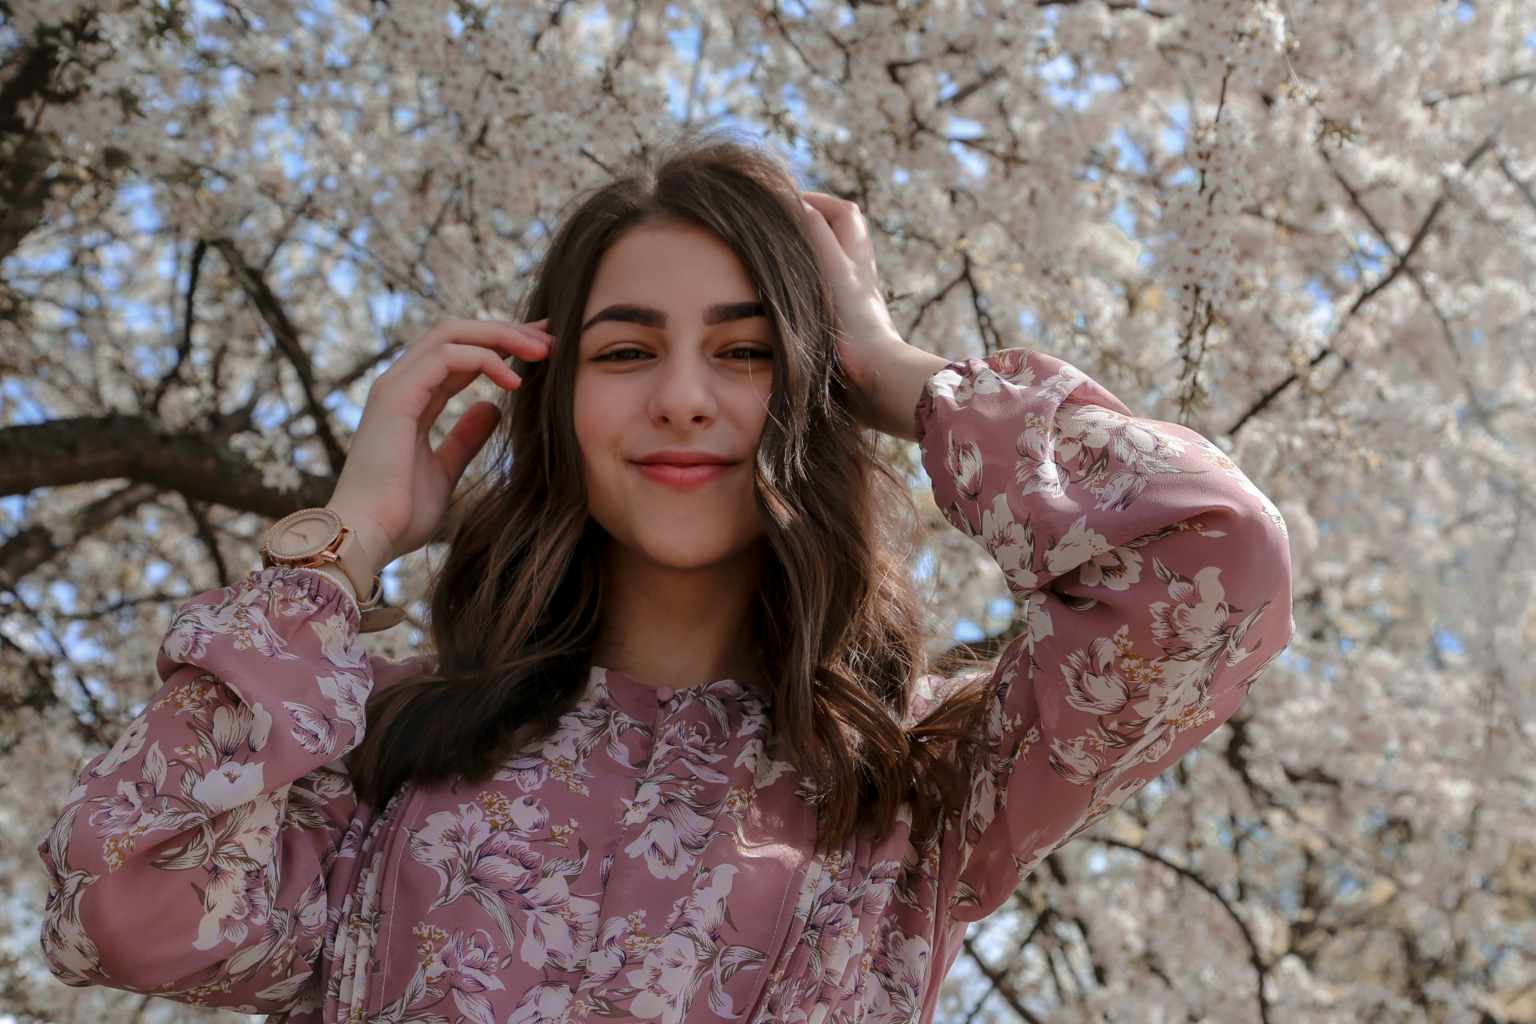 Woman smiling and wearing a cute spring outfit